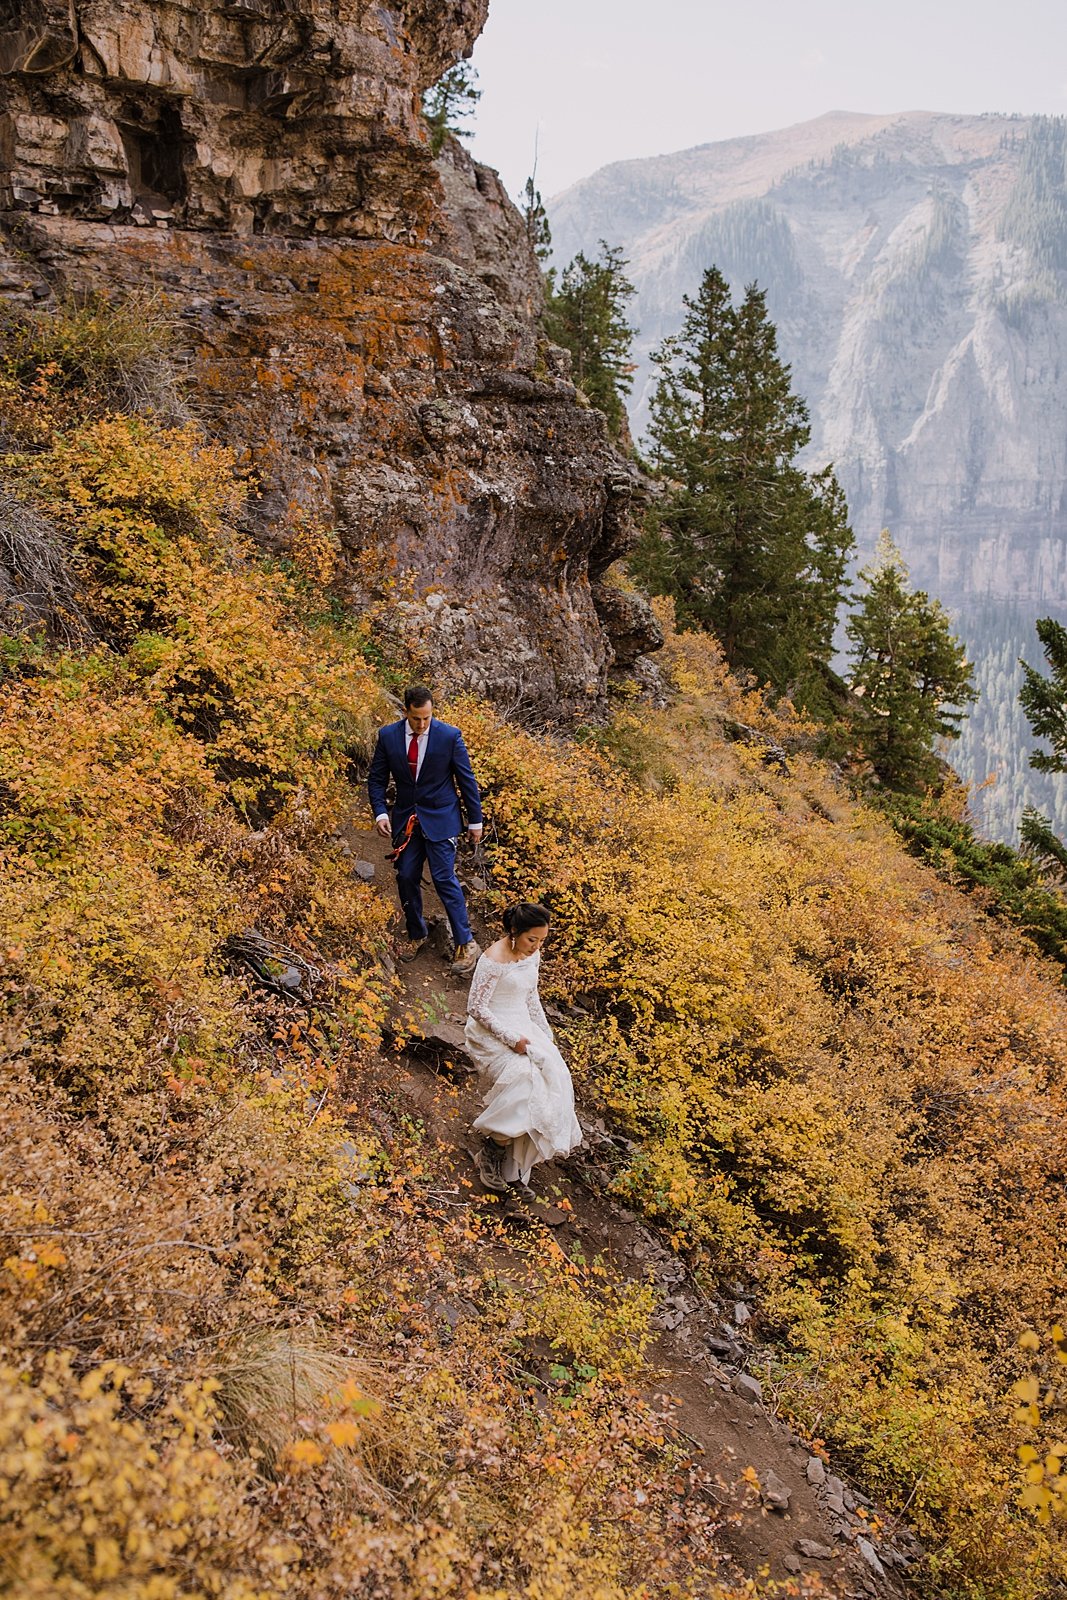 bride and groom hiking out of the telluride via ferrata, telluride via ferrata elopement, telluride overlook, black bear pass overlook, black bear pass elopement, black bear pass 4x4 ohv road